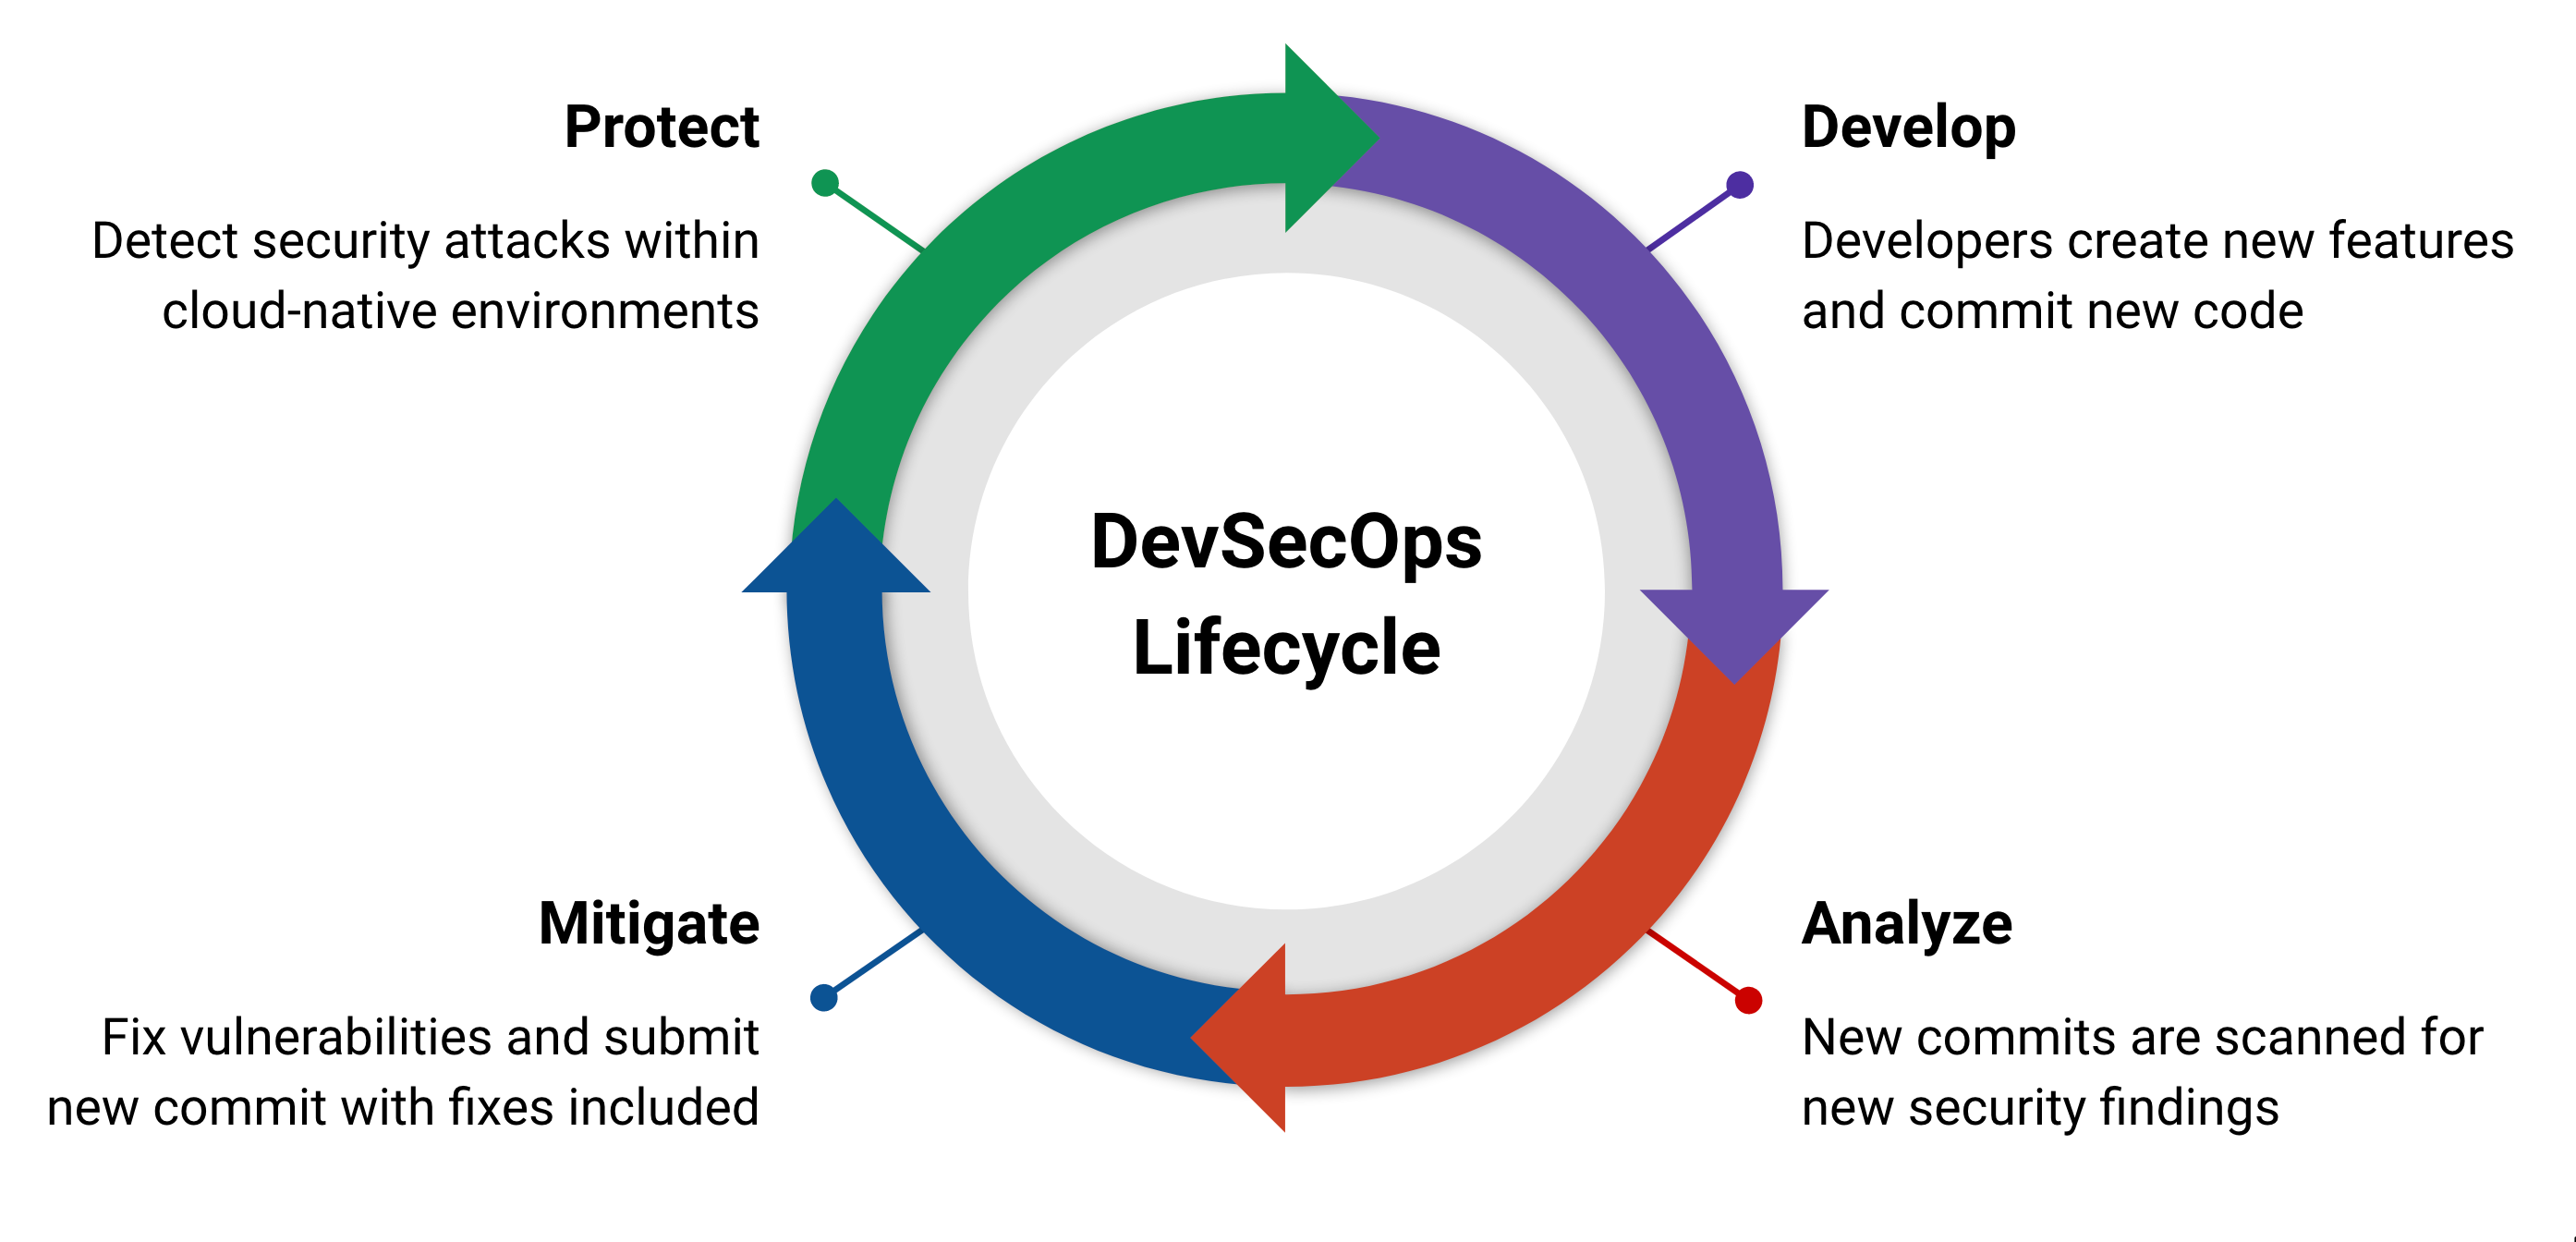 DevSecOps Lifecycle